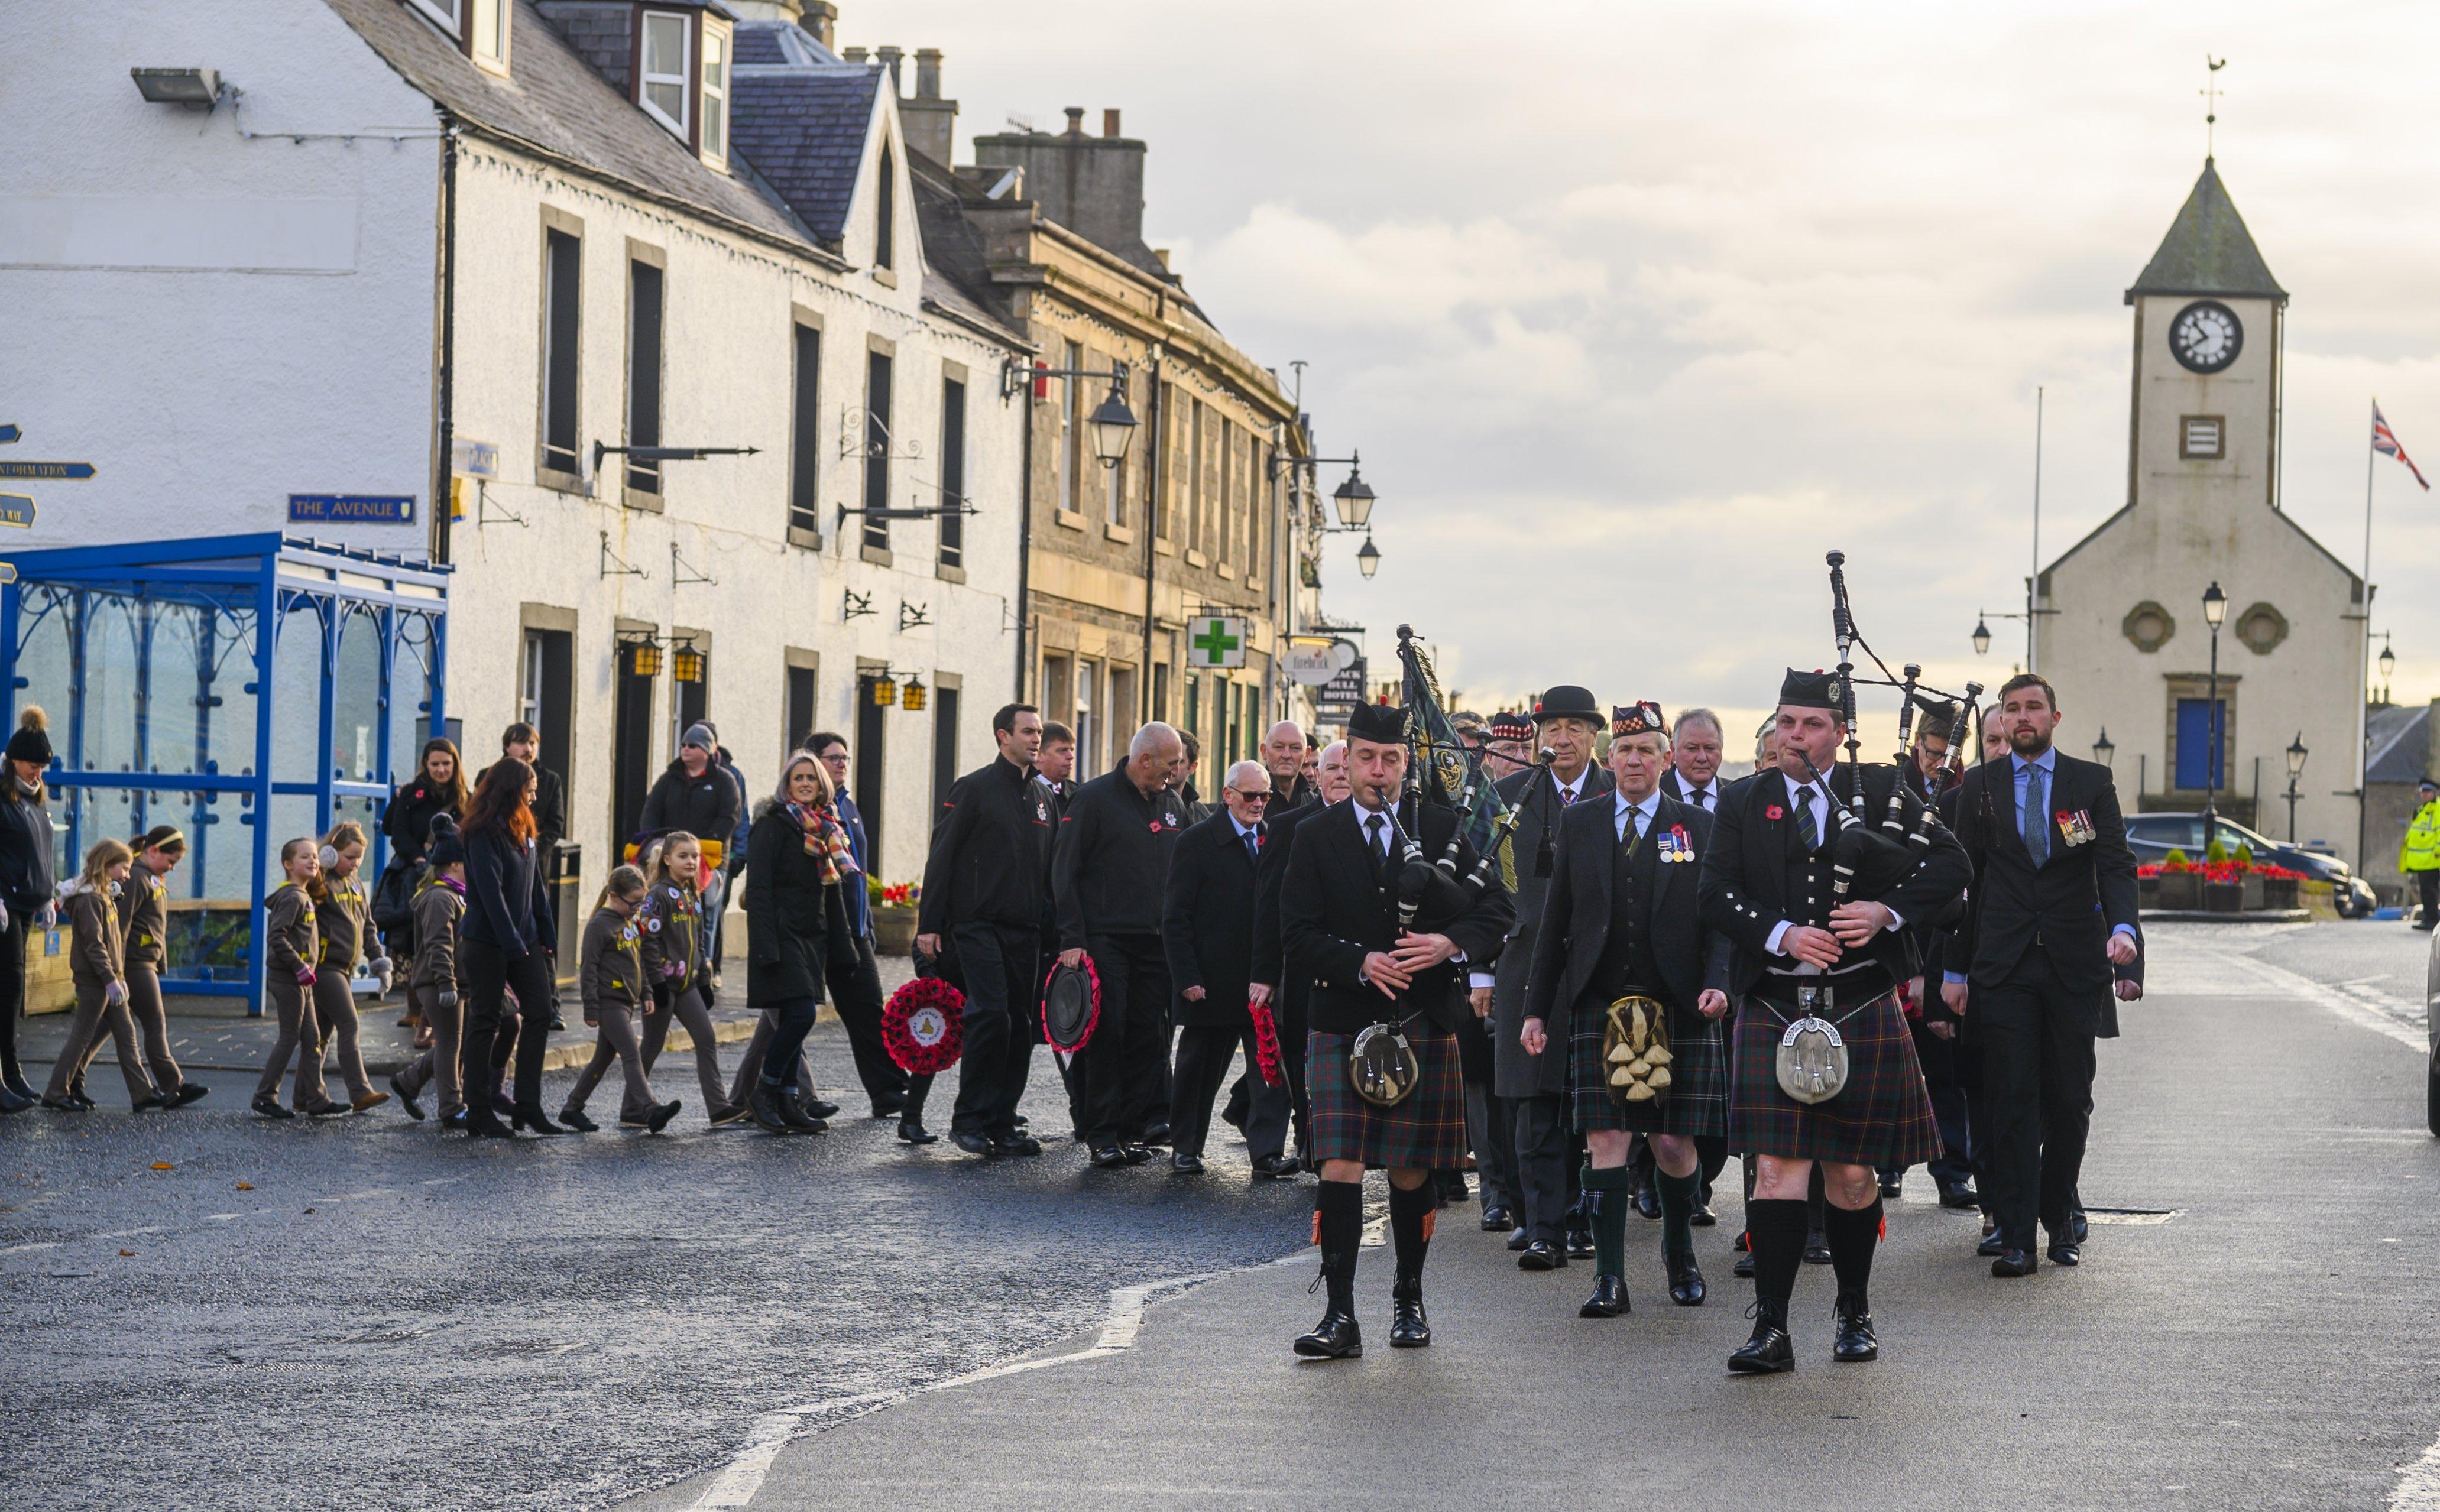 Pipers Euan Craig and Callum Atkinson lead the remembrance parade in Lauder.